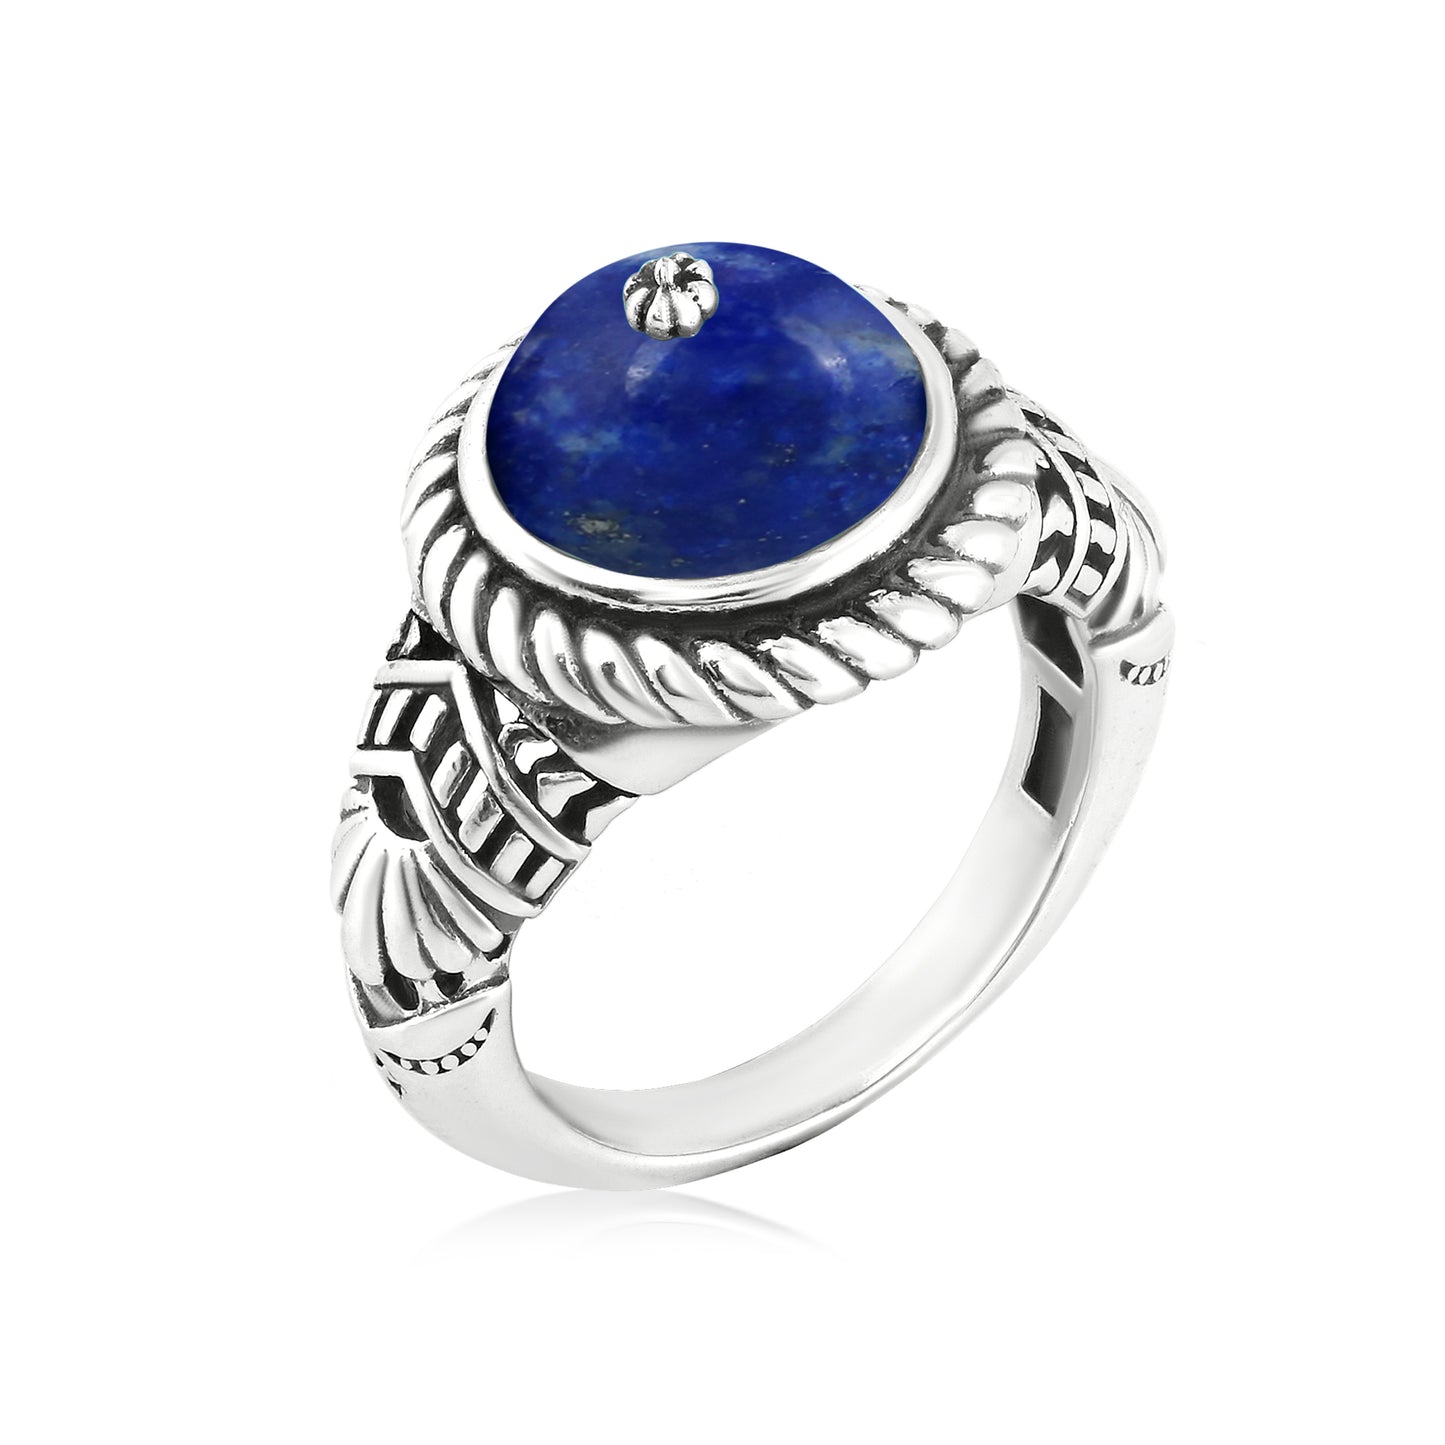 Southwestern Blue Wildflower Ring-Crafted from Sterling Silver with Lapis Gemstone, Sizes 5 - 10